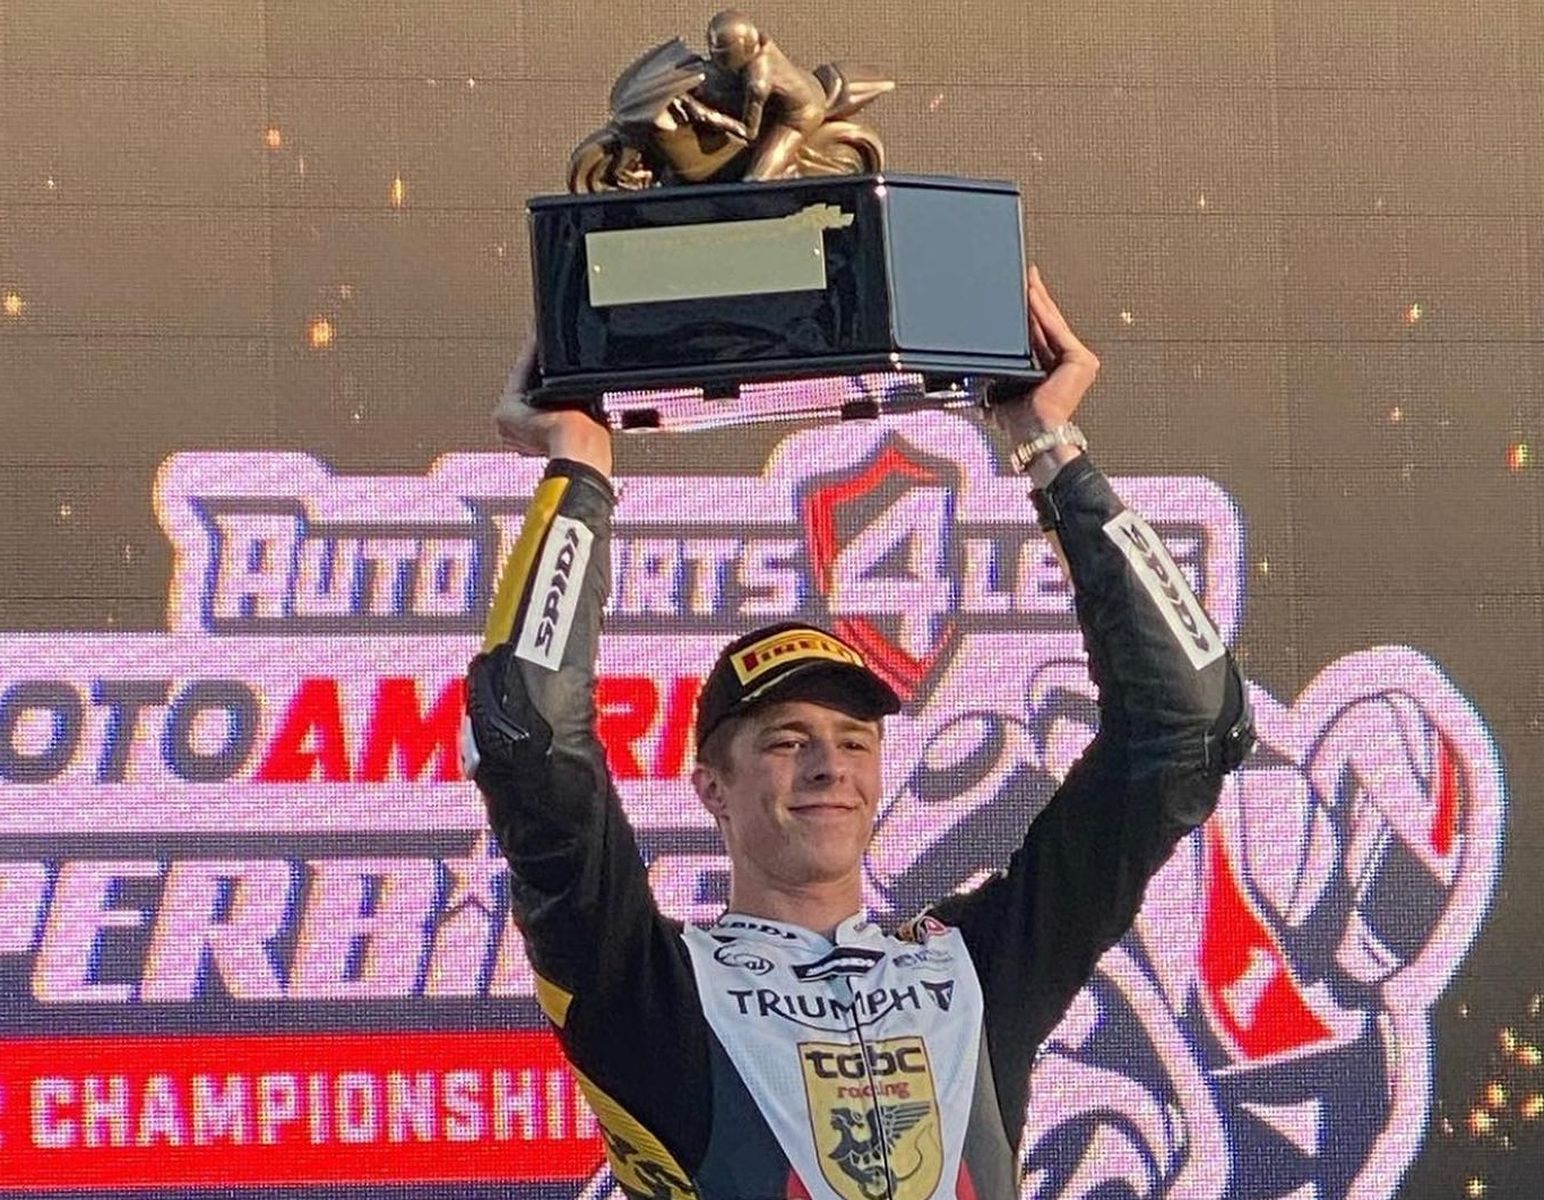 A view of Brandon Paasch, Arai athlete and motorcycle racer who use a slingshot maneuver to secure his second win in a row